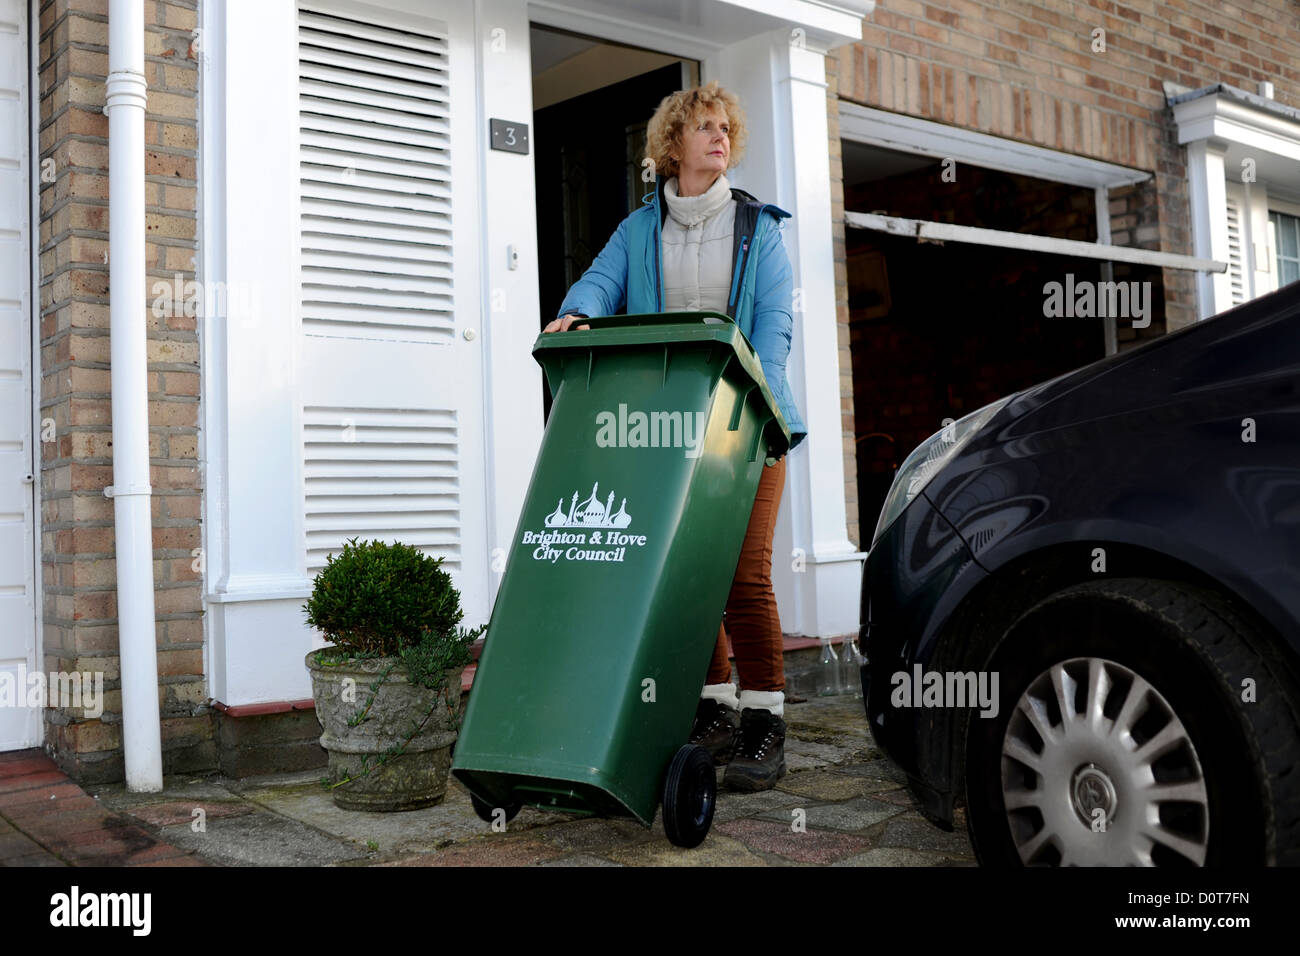 Housewife middle aged woman in putting out the rubbish collection bin ready for the dustmen in Brighton UK Stock Photo